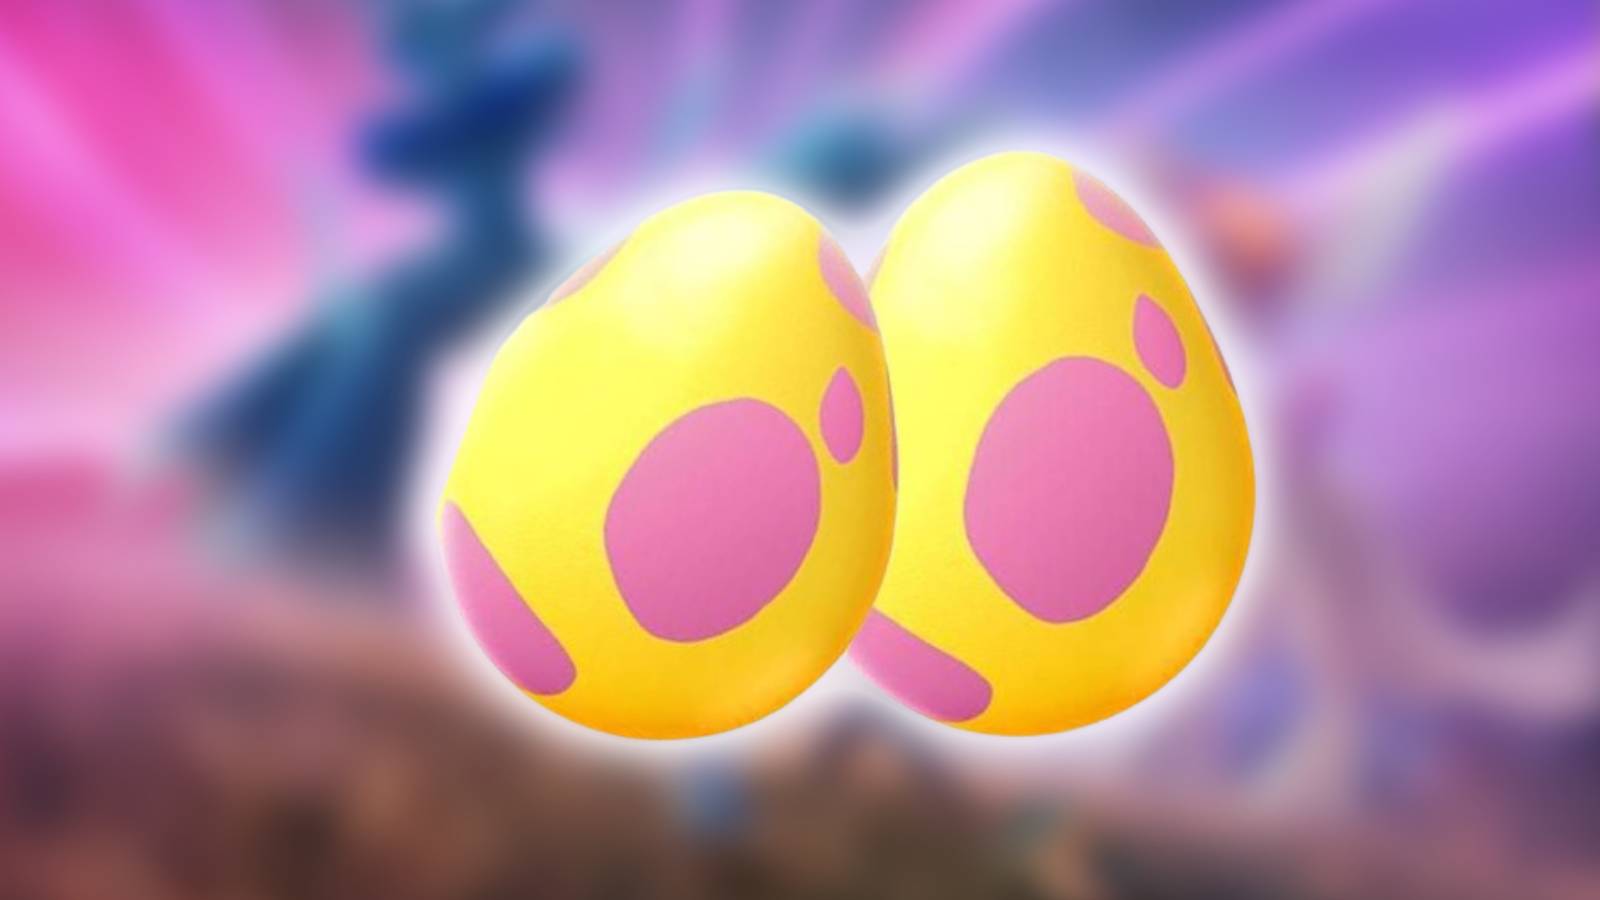 A pair of Pokemon eggs are visible against a blurred background